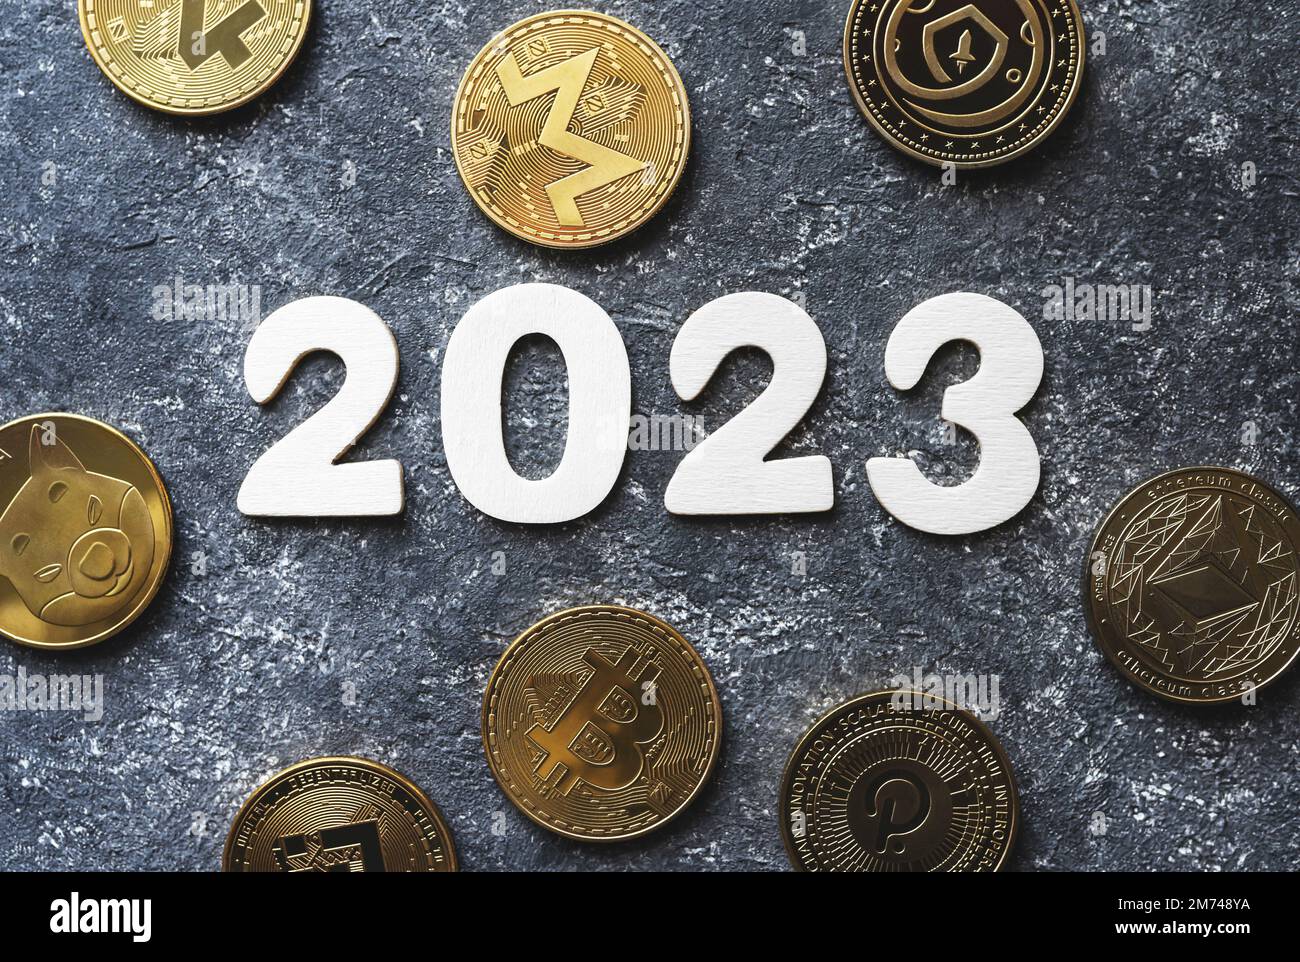 Cryptocurrency in 2023. Golden crypto coins Bitcoin, Ethereum, Shiba, BNB, Monero, Polkadot next to the year number on concrete background. 2023 price, market trends prediction concept. Stock Photo